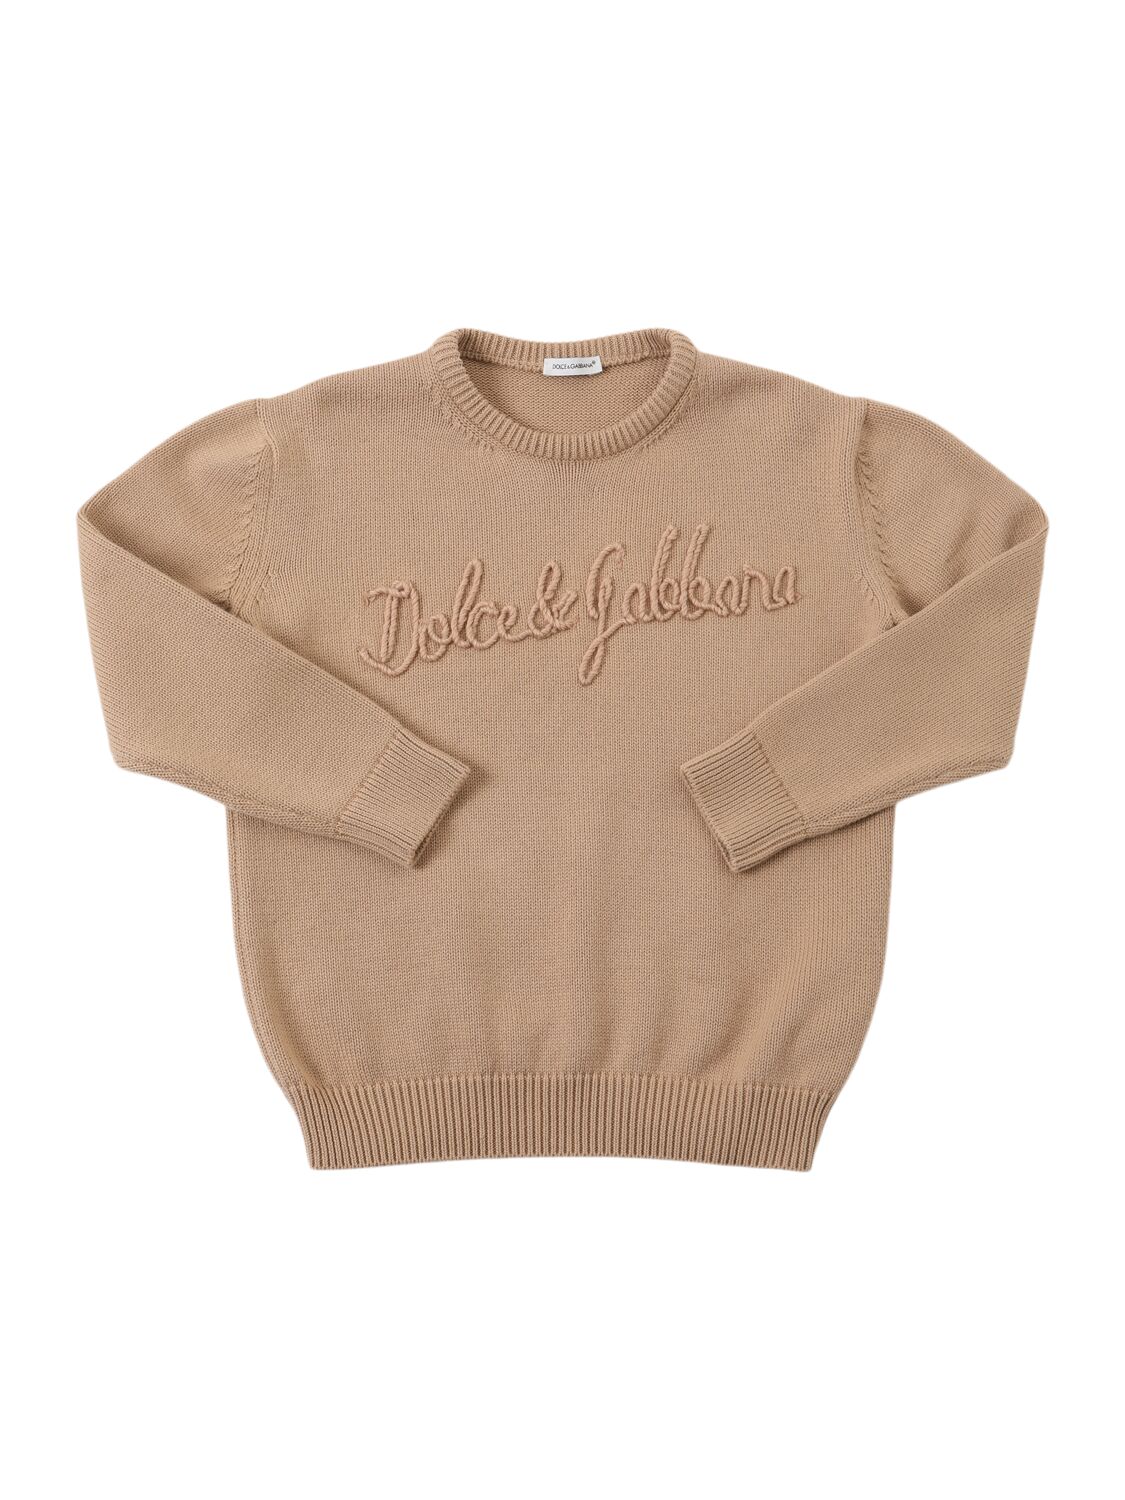 Dolce & Gabbana Embroidered Logo Cotton Knit Sweater In Brown